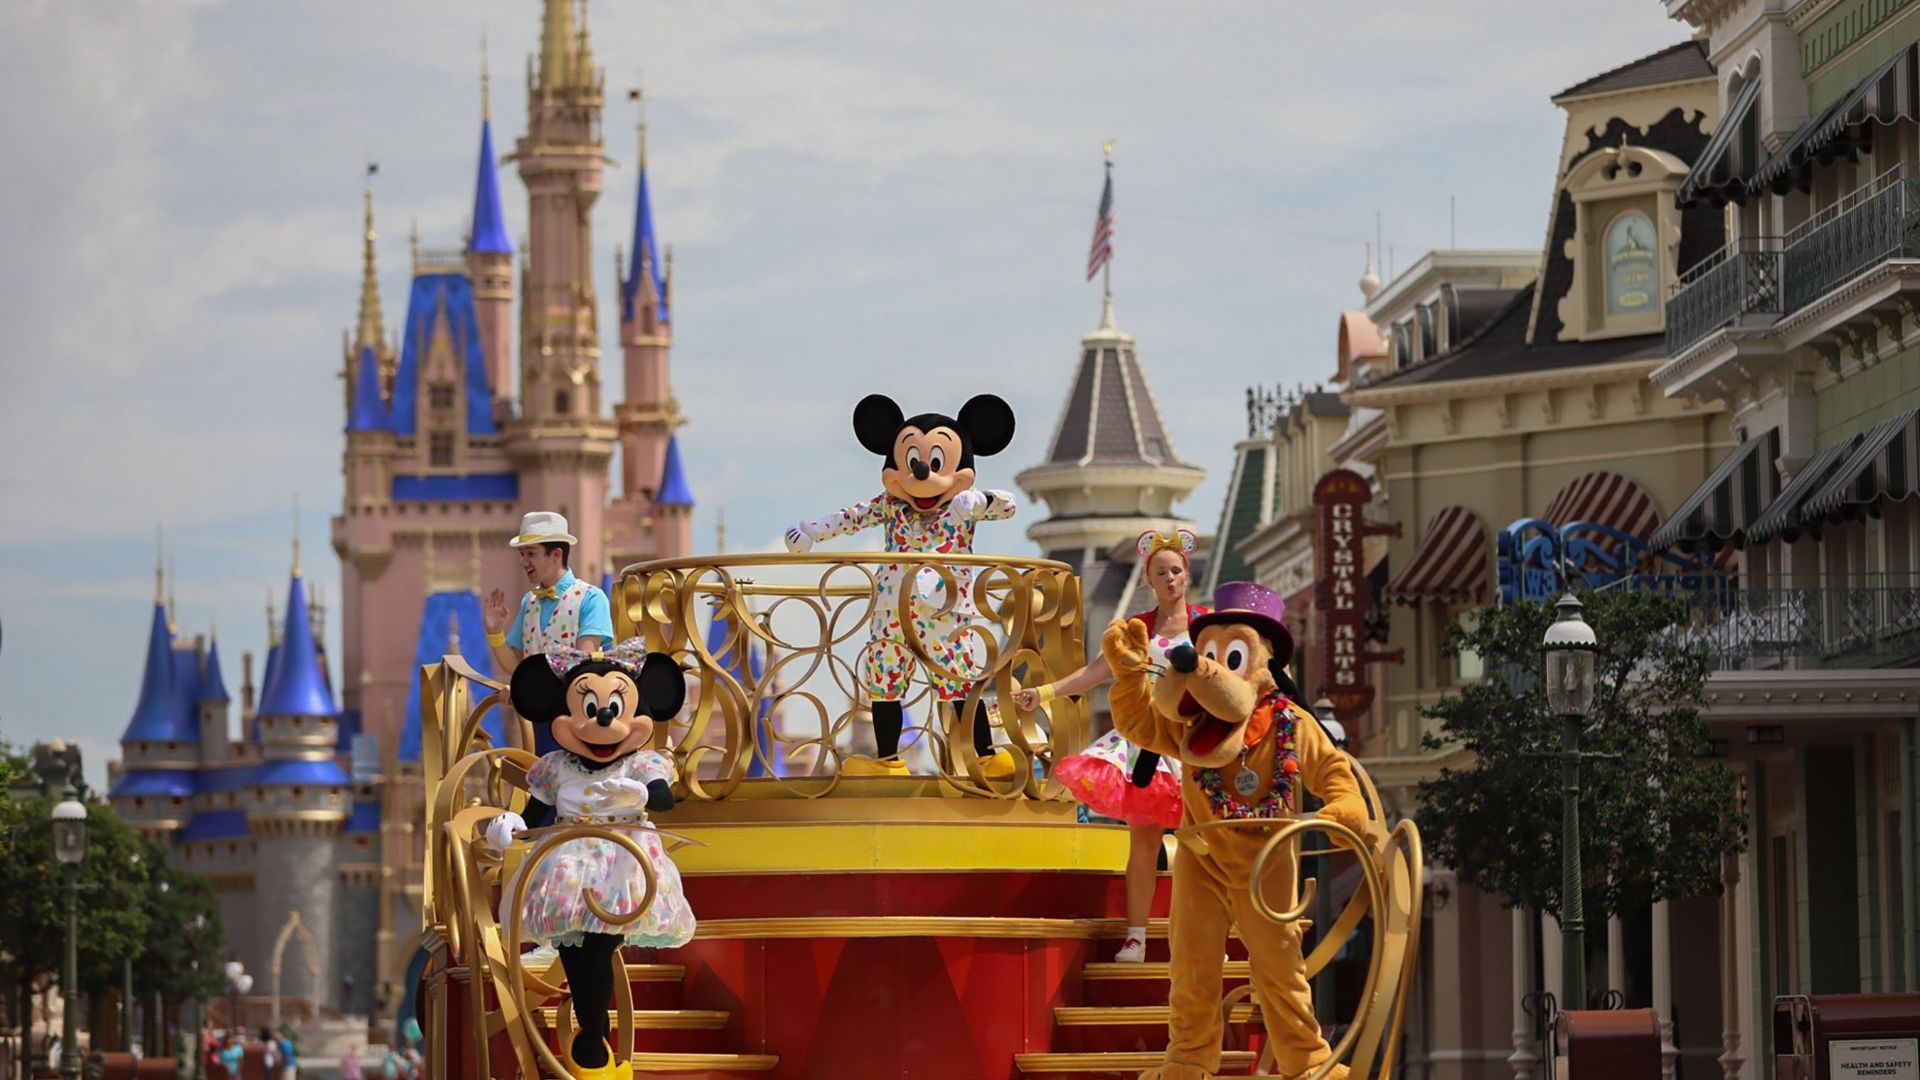 Here's how you can meet your favorite characters during Walt Disney World's phased reopening